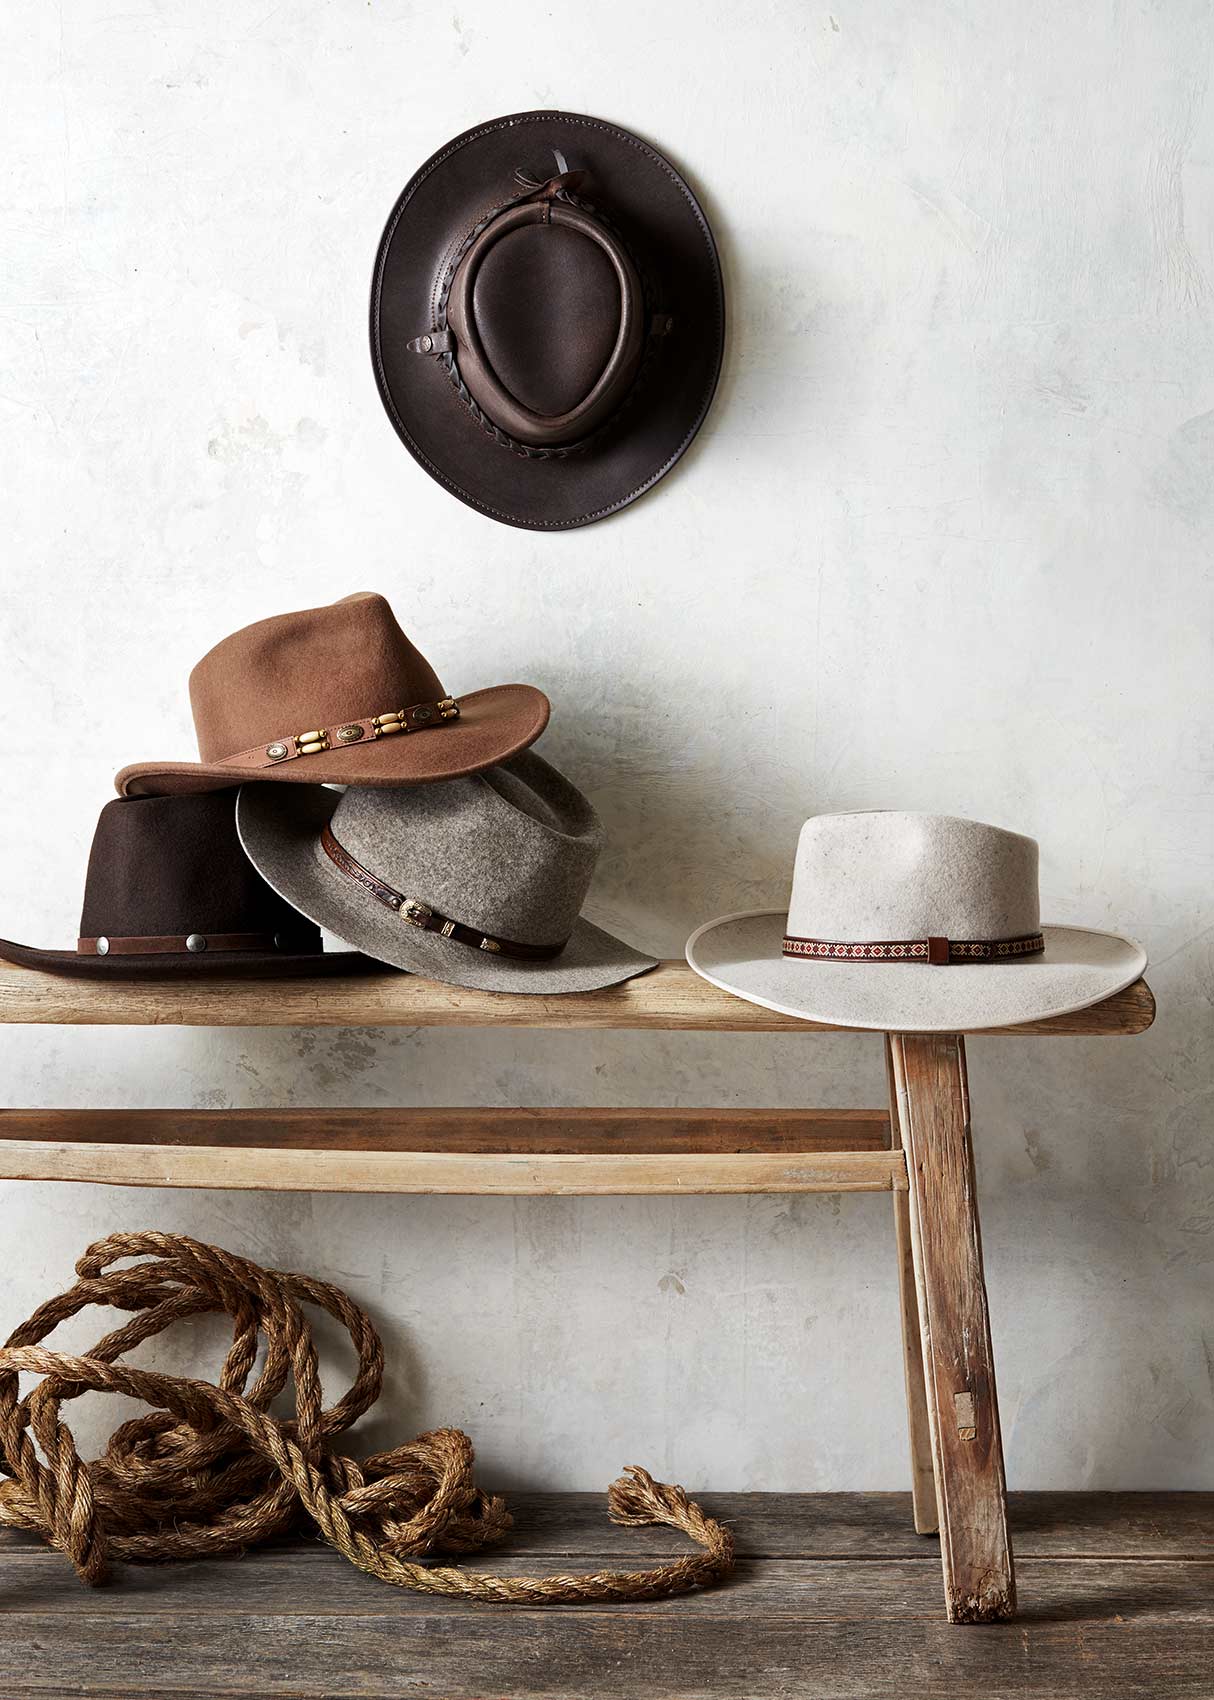 Catalog photography featuring hats and vintage props.